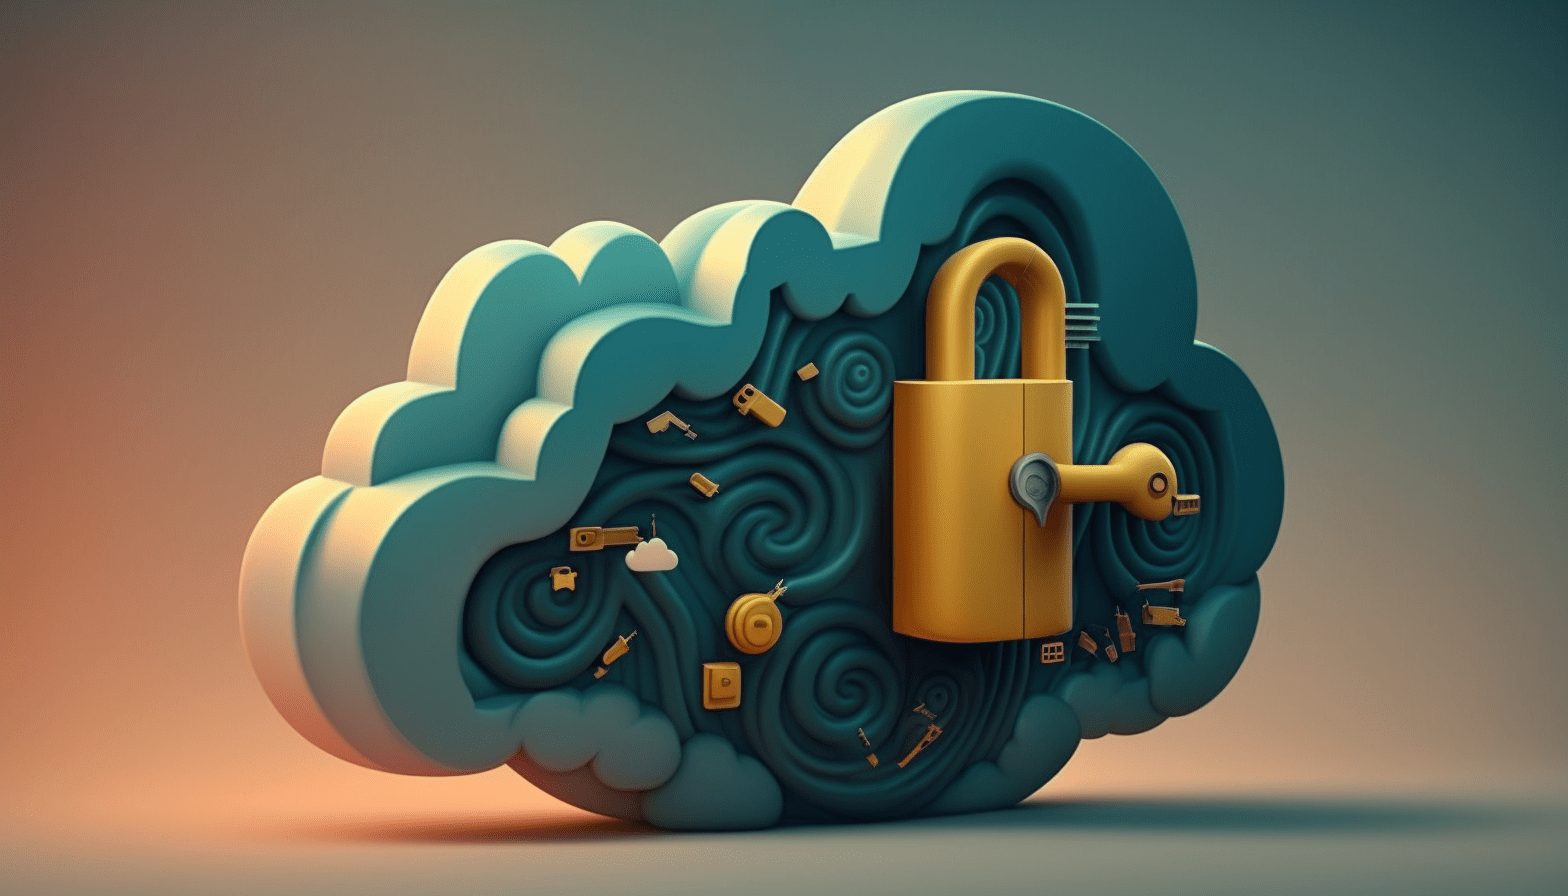 A cartoon cloud with a lock on it, representing the secure and compliant cloud environment being built in the article.